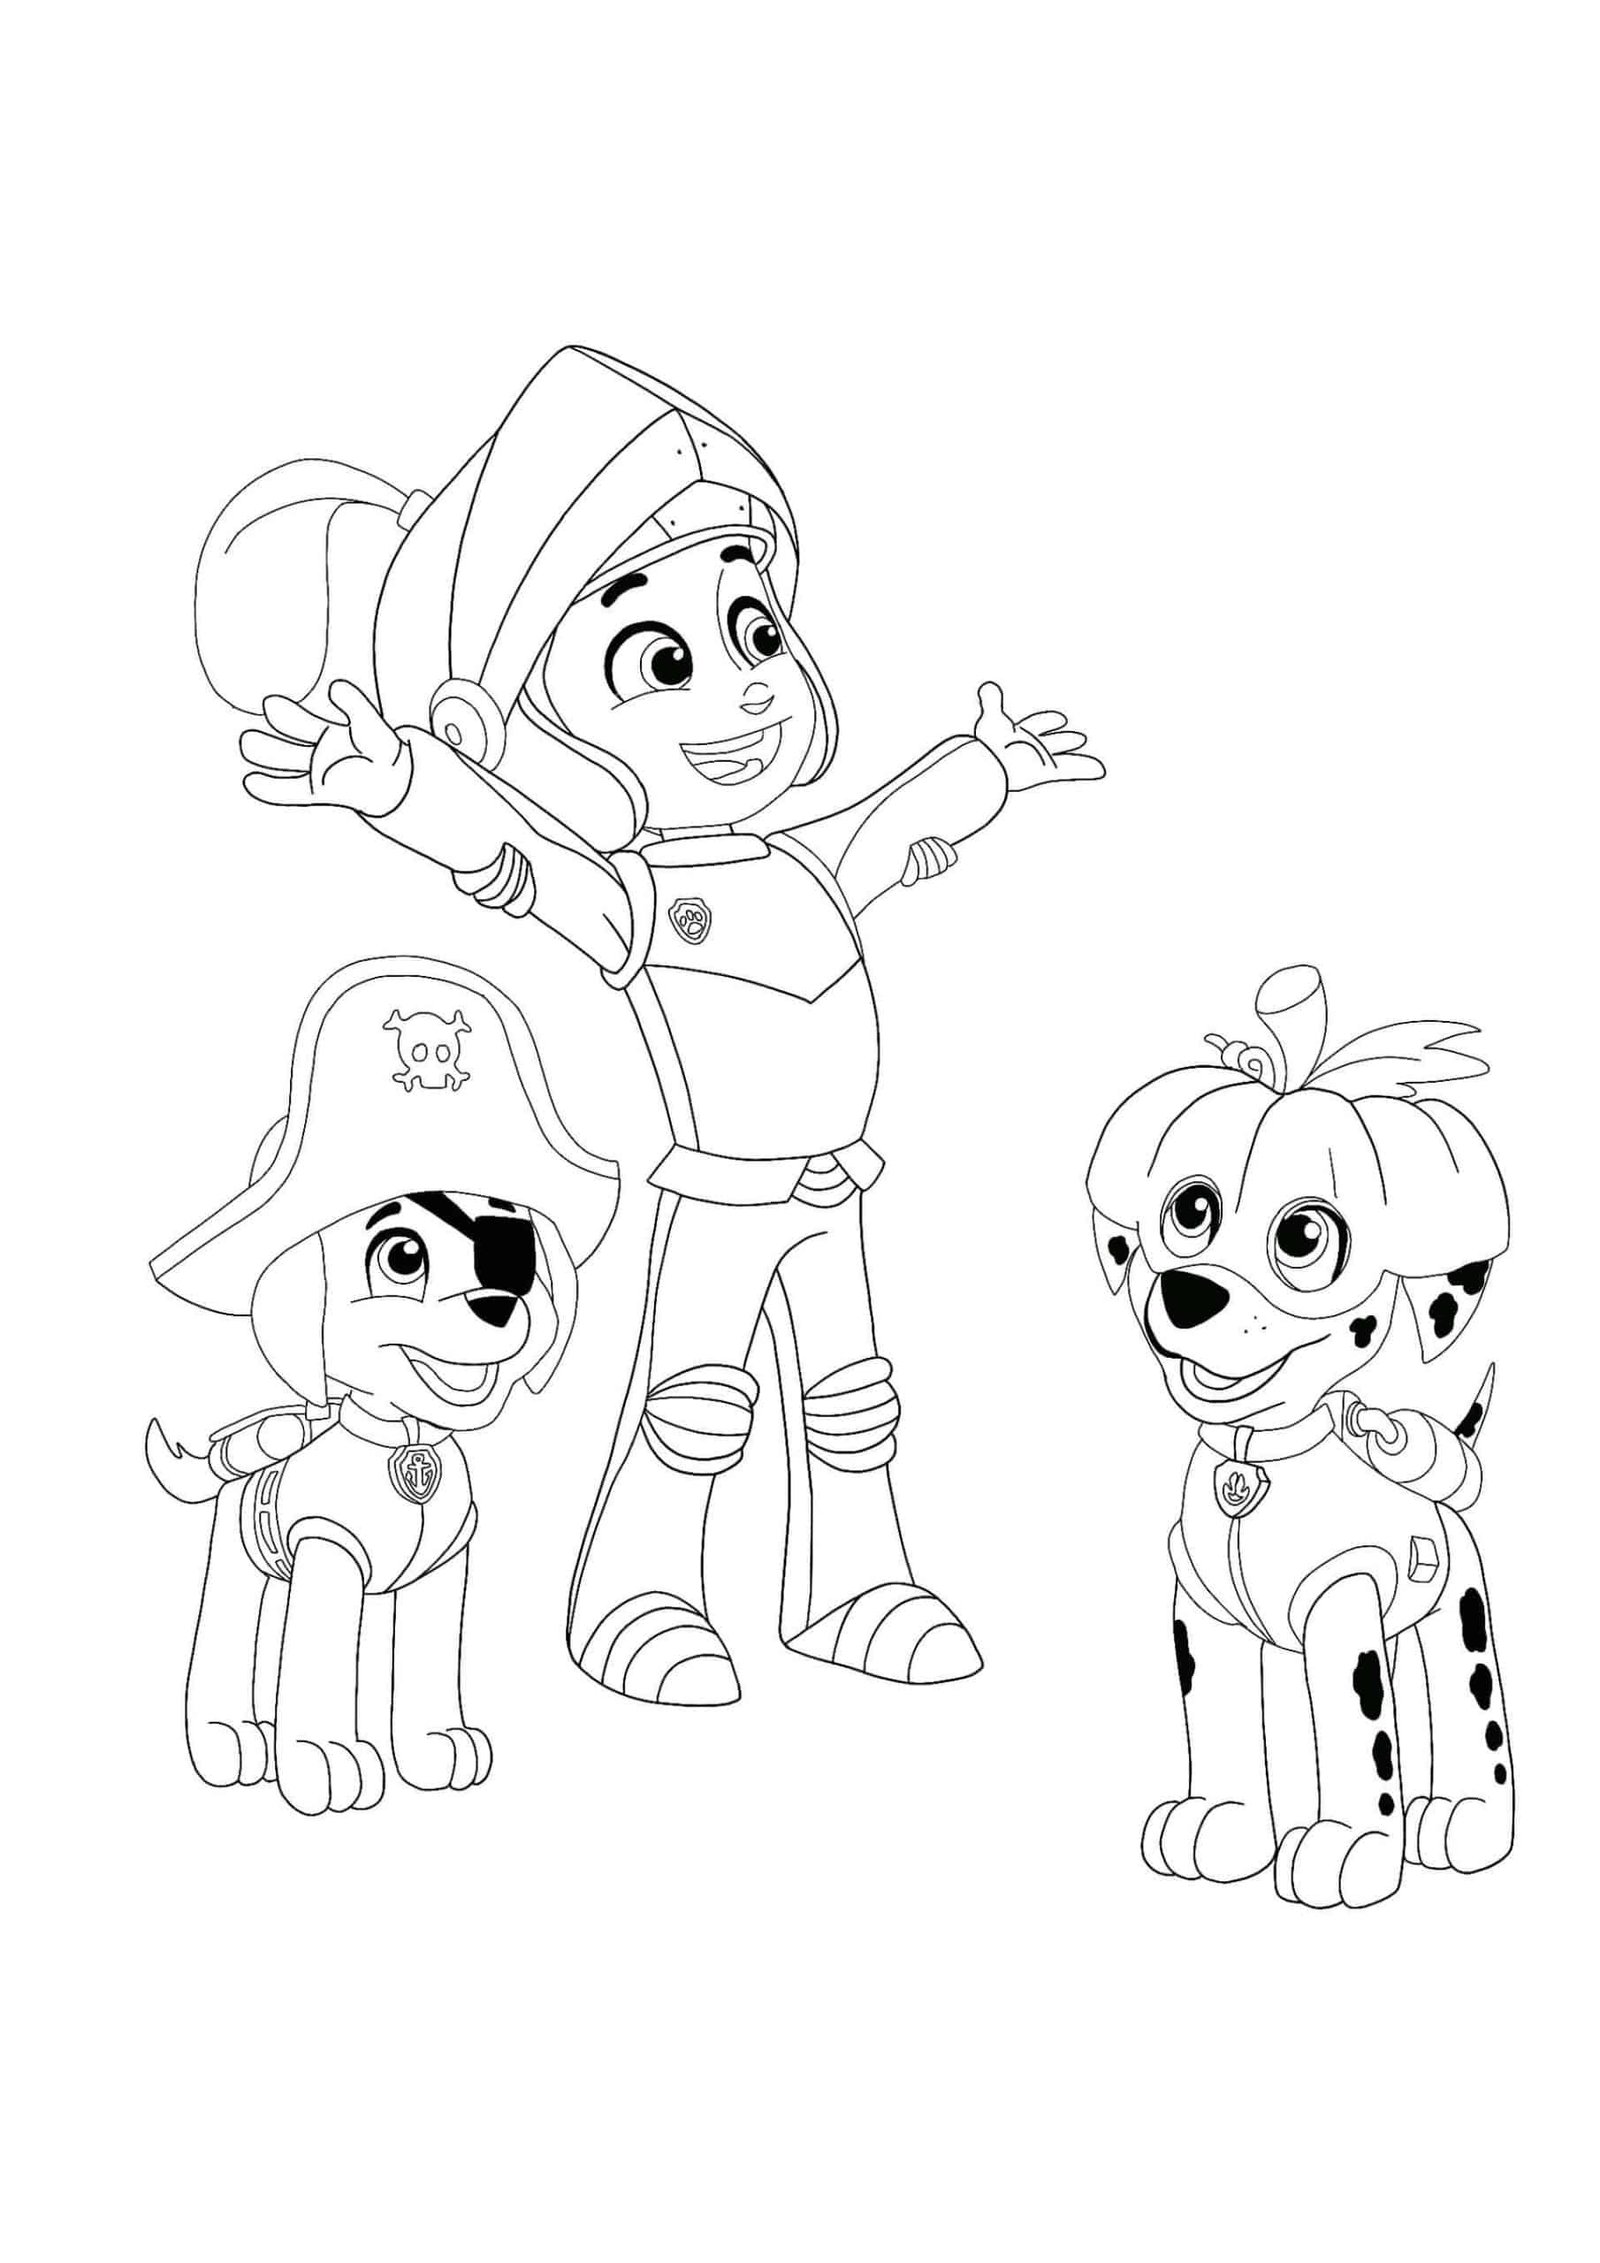 Paw Patrol Halloween coloring page